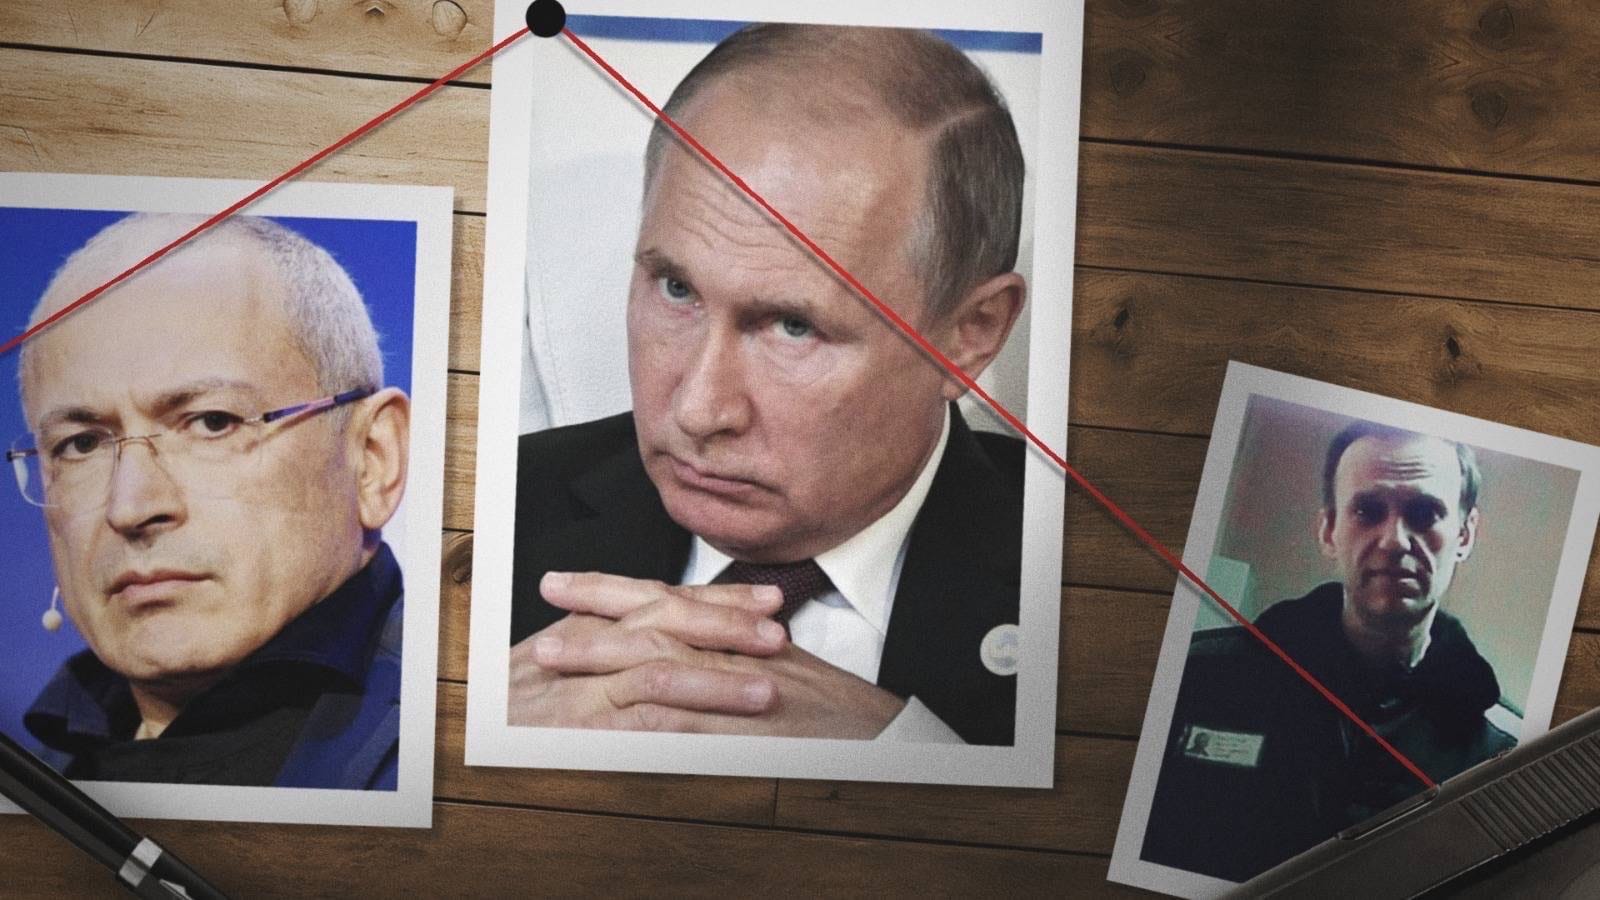 Khodorkovsky could become Putin's new victim after the murder of Navalny